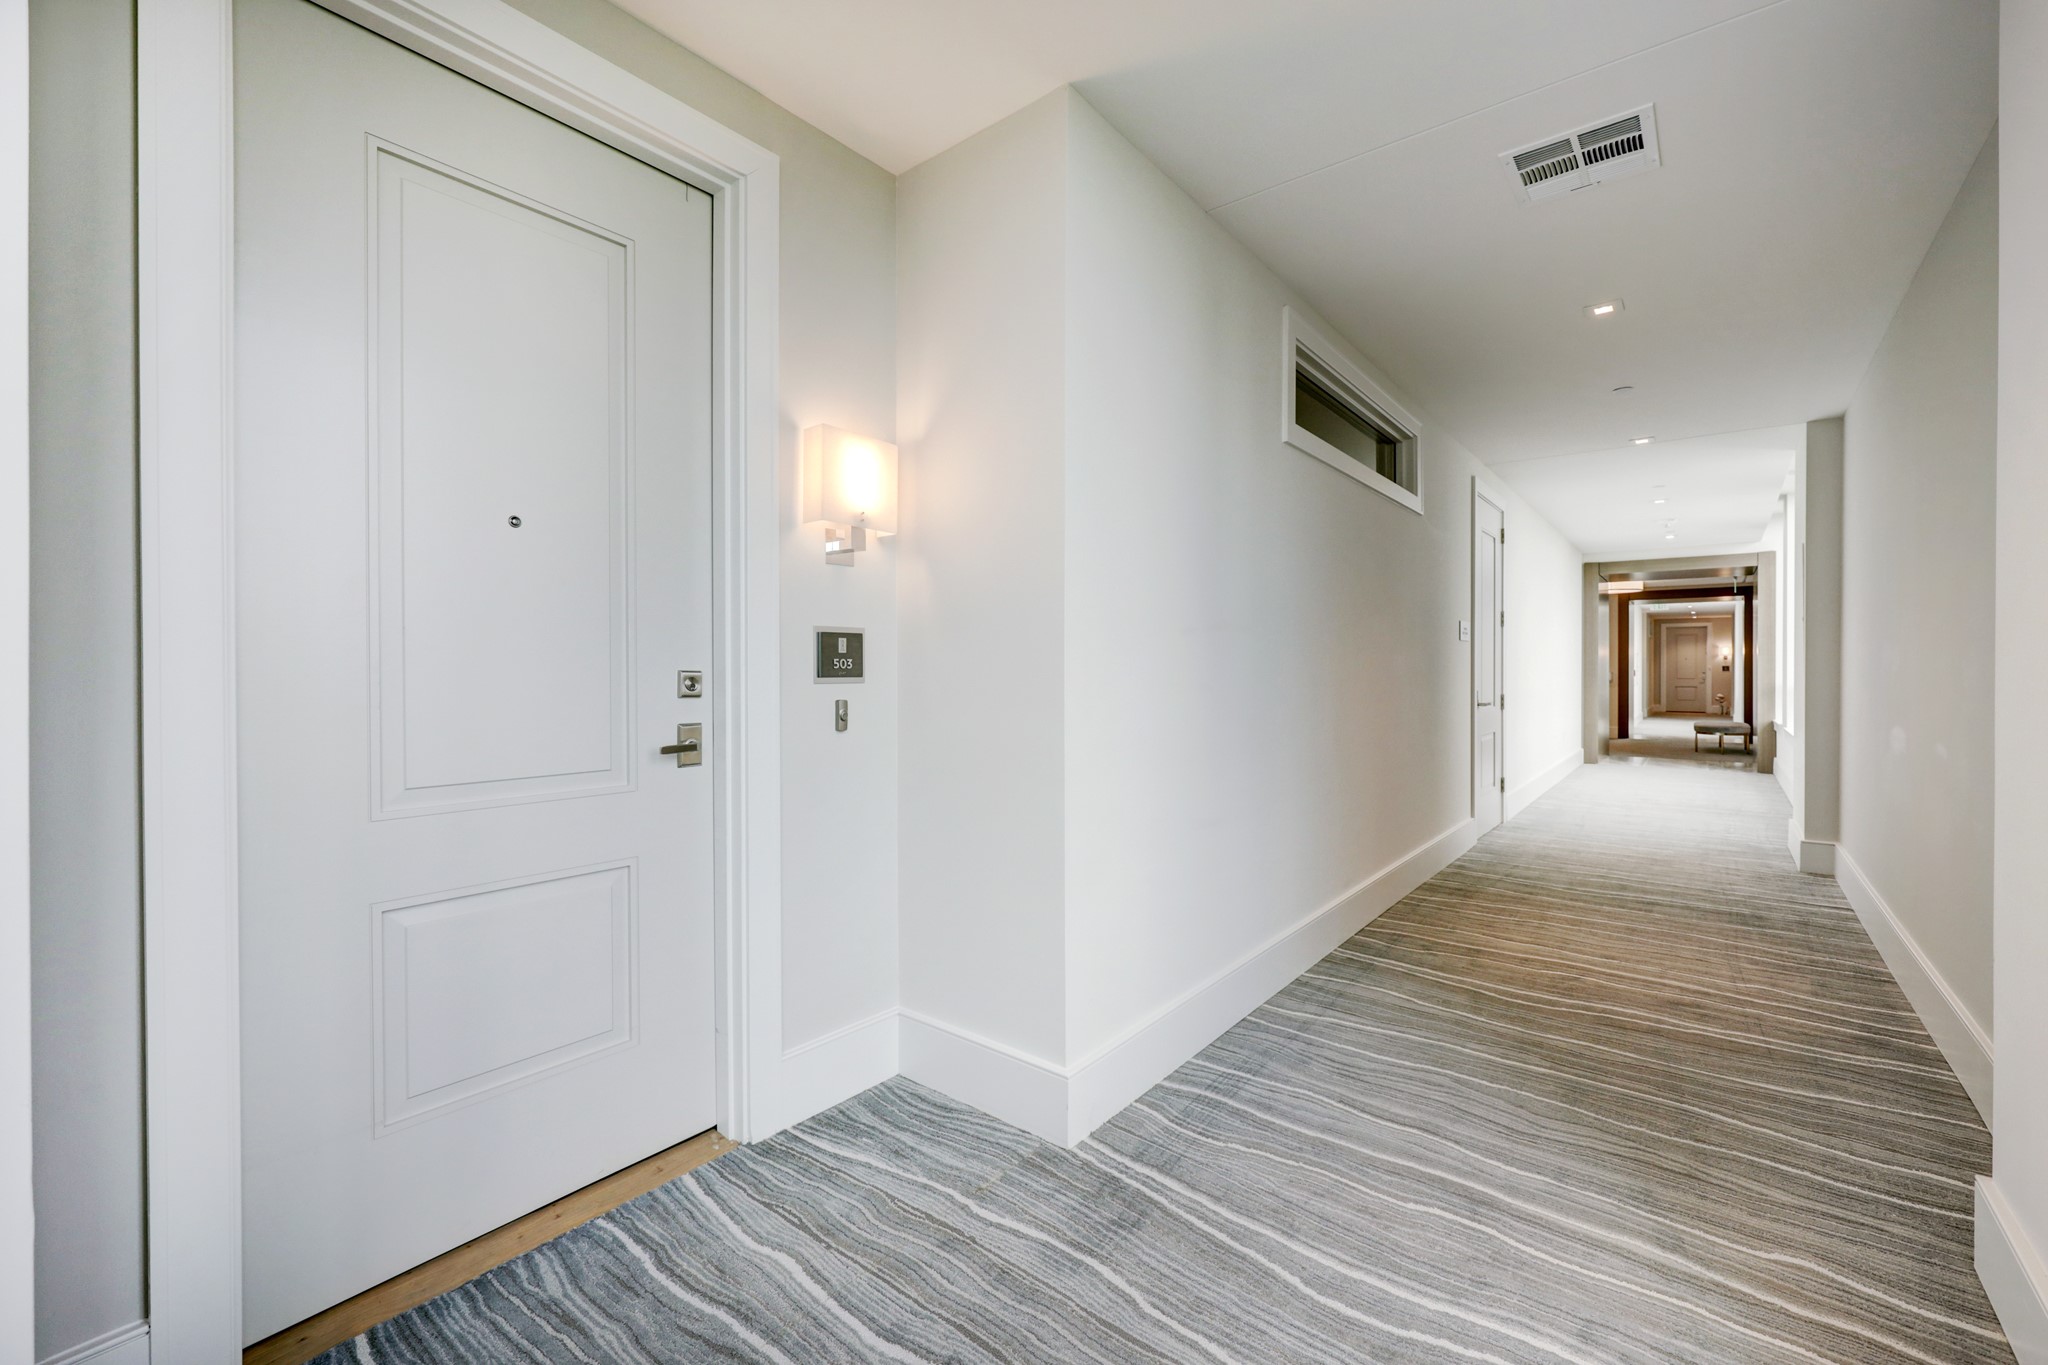 View of the FRONT DOOR to #503. A brightly lit hallway from the elevator shaft leads through the softly painted walls and handsome carpeting to the unit's stately front door with elegant door handle/wall sconce.